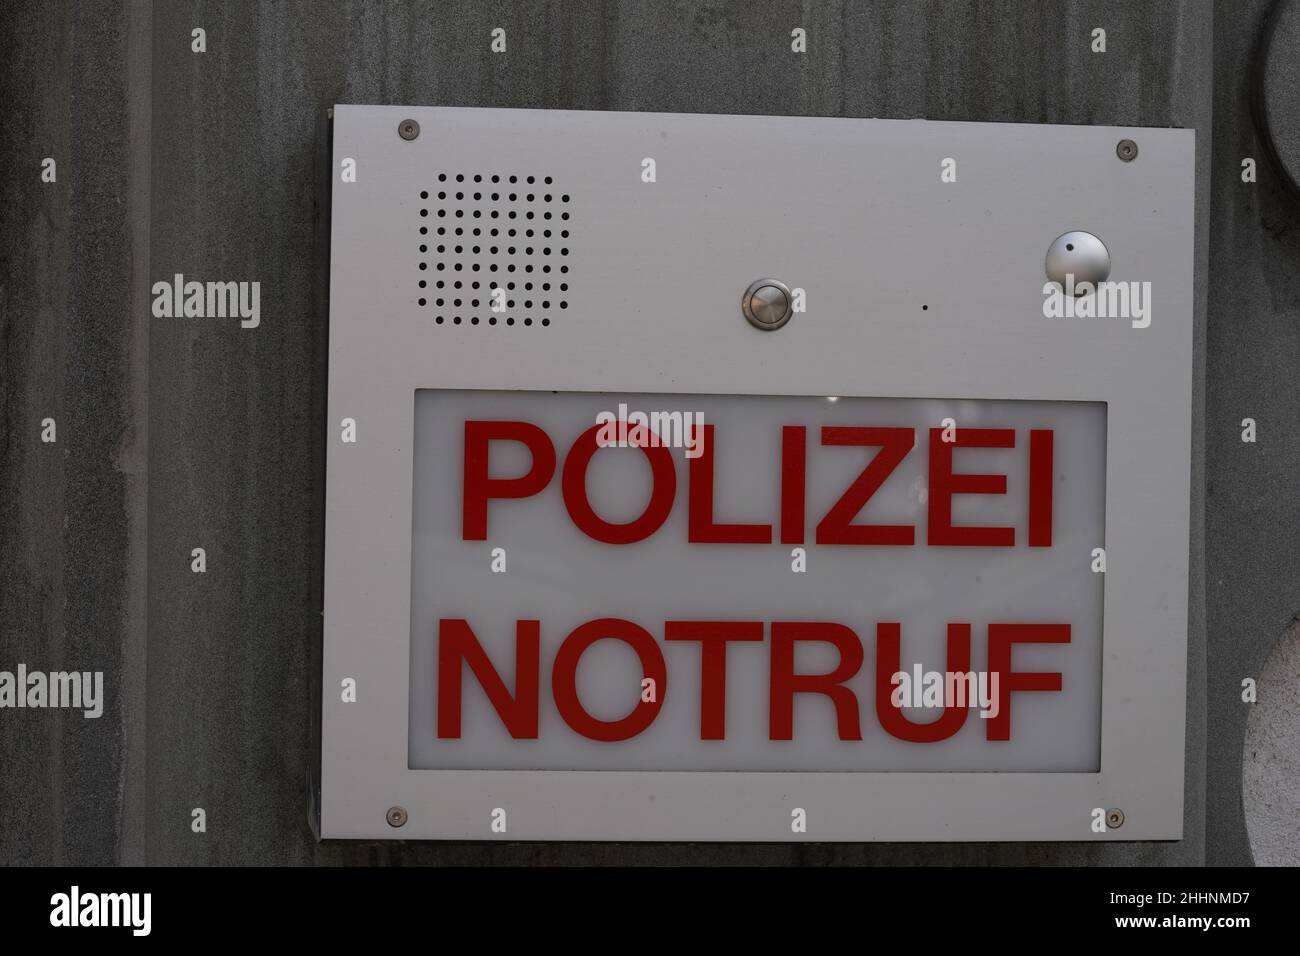 Intercom call box with inscription in German saying police emergency, in capital letters in red color. Stock Photo